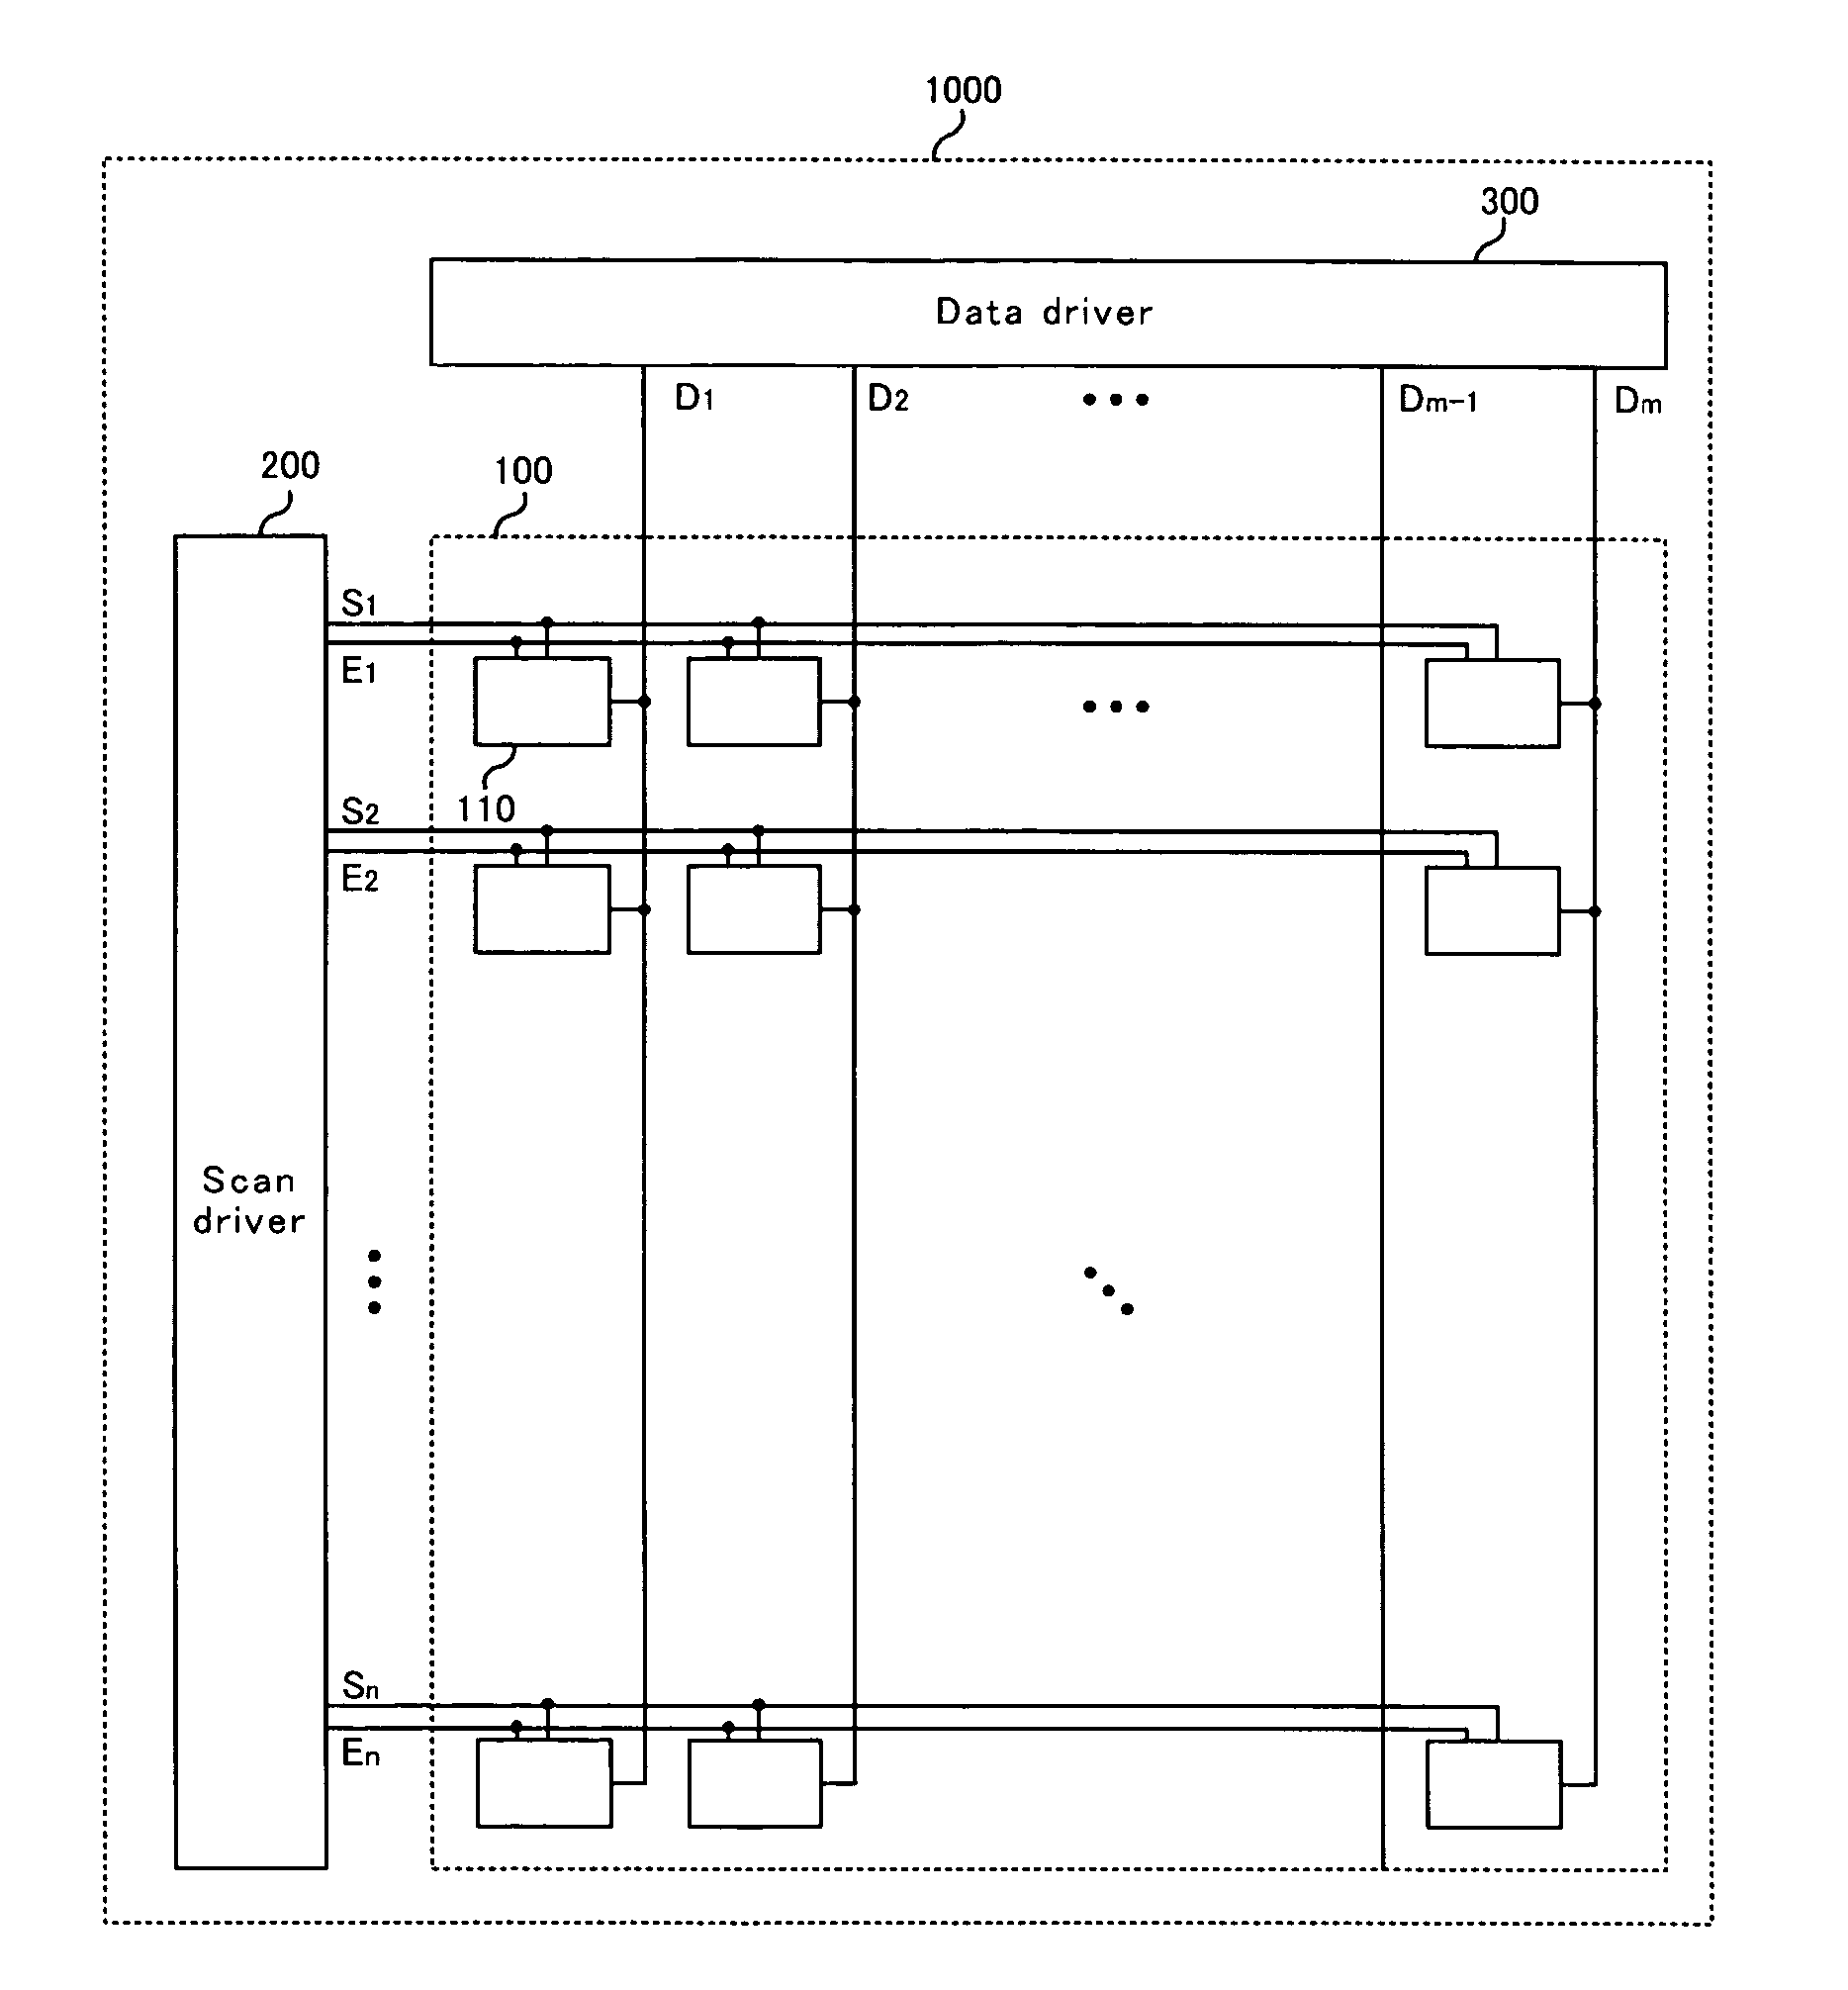 Data driving apparatus in a current driving type display device